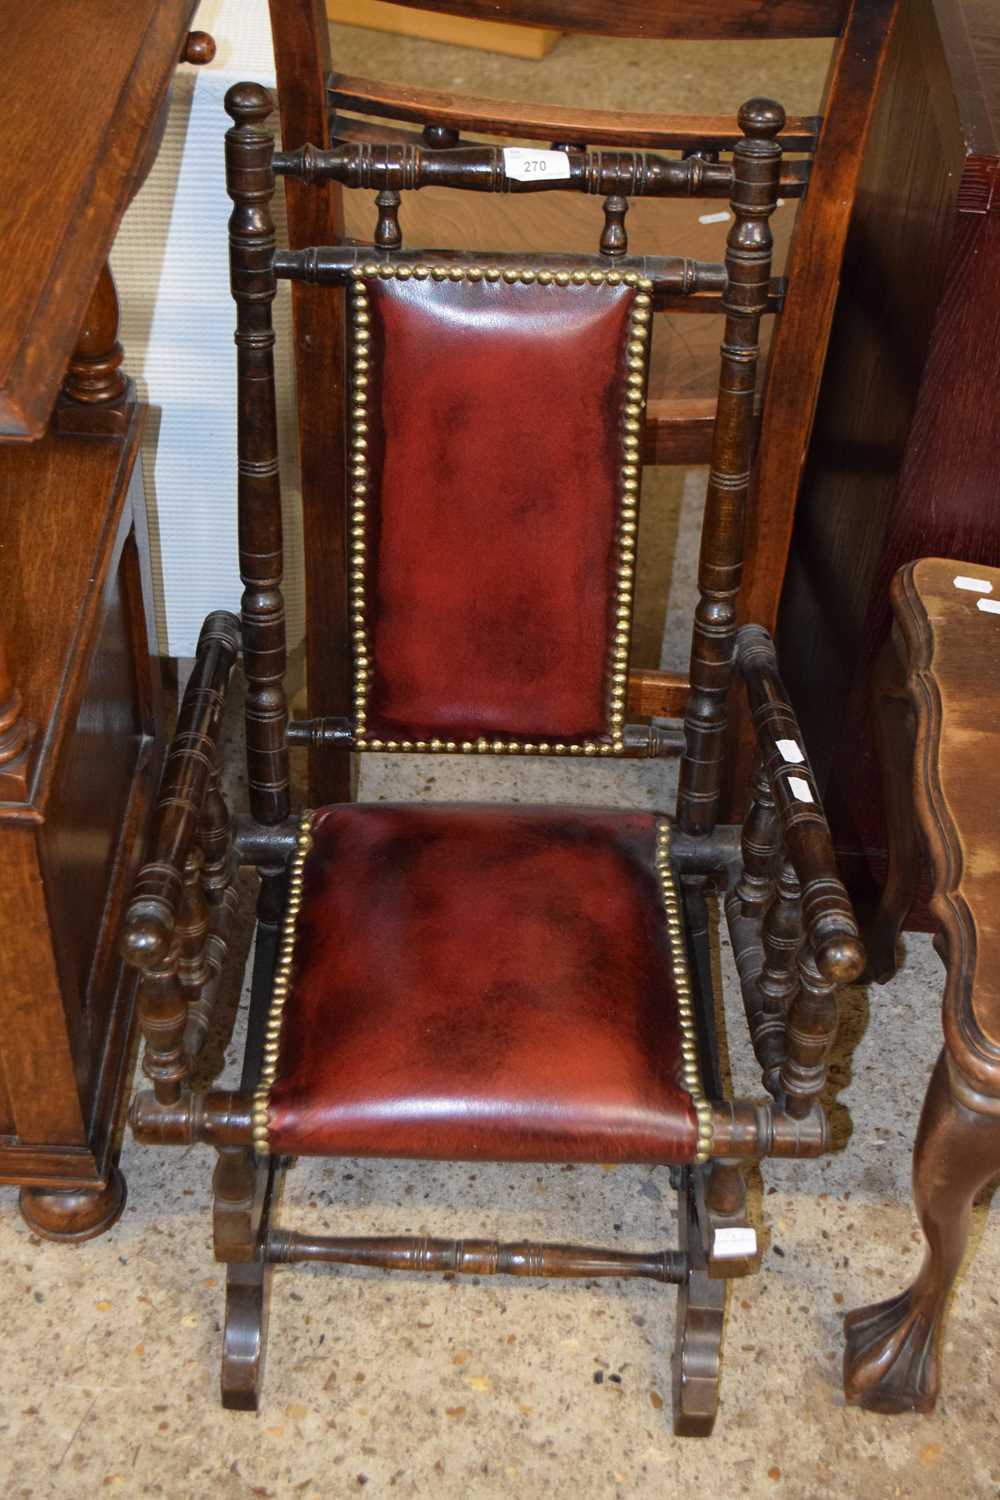 Late 19th Century American childs rocking chair, 70cm high